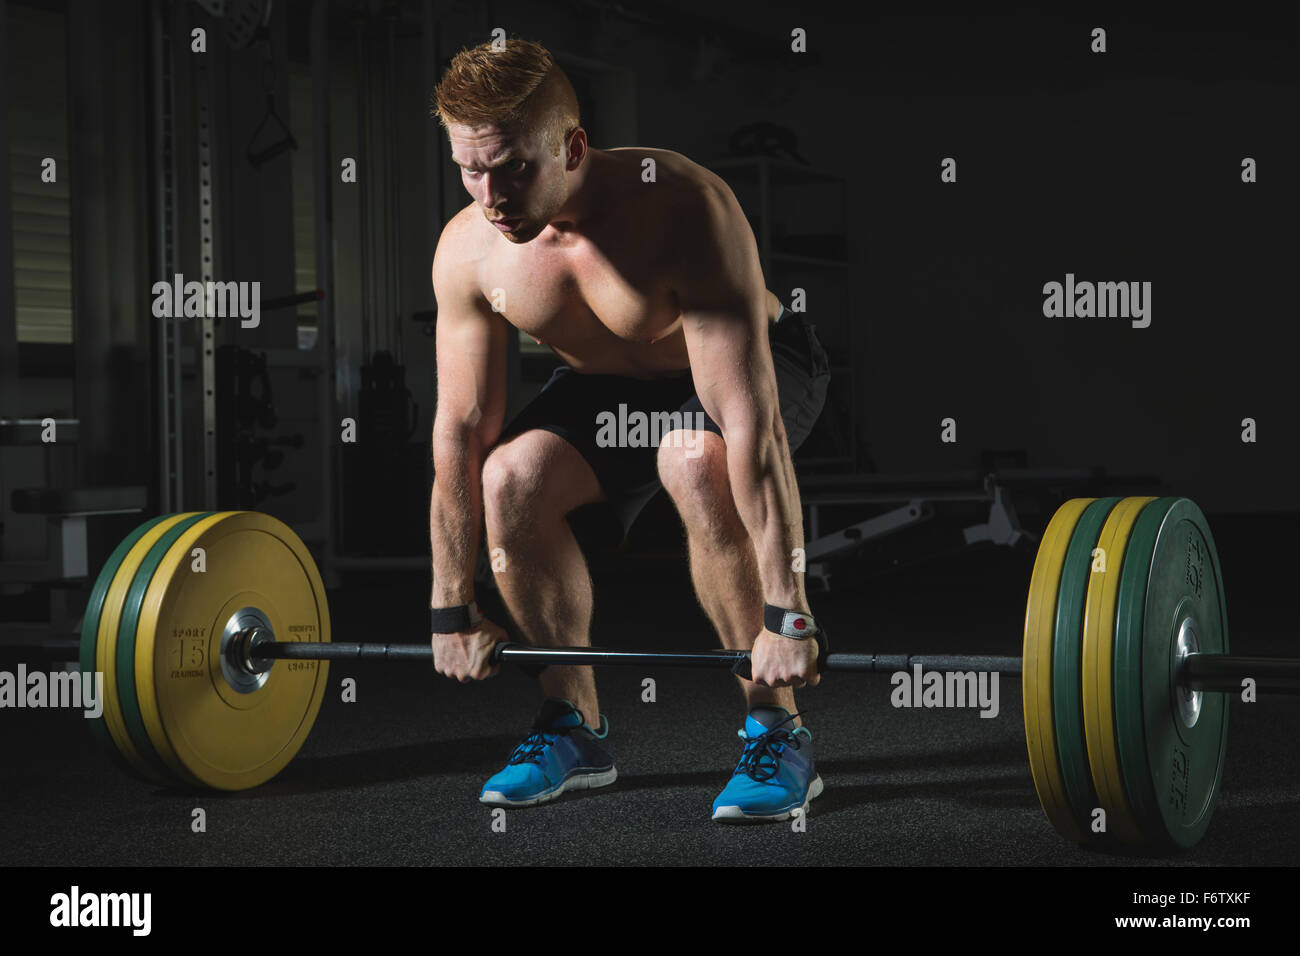 Physical athlete weightlifting Stock Photo